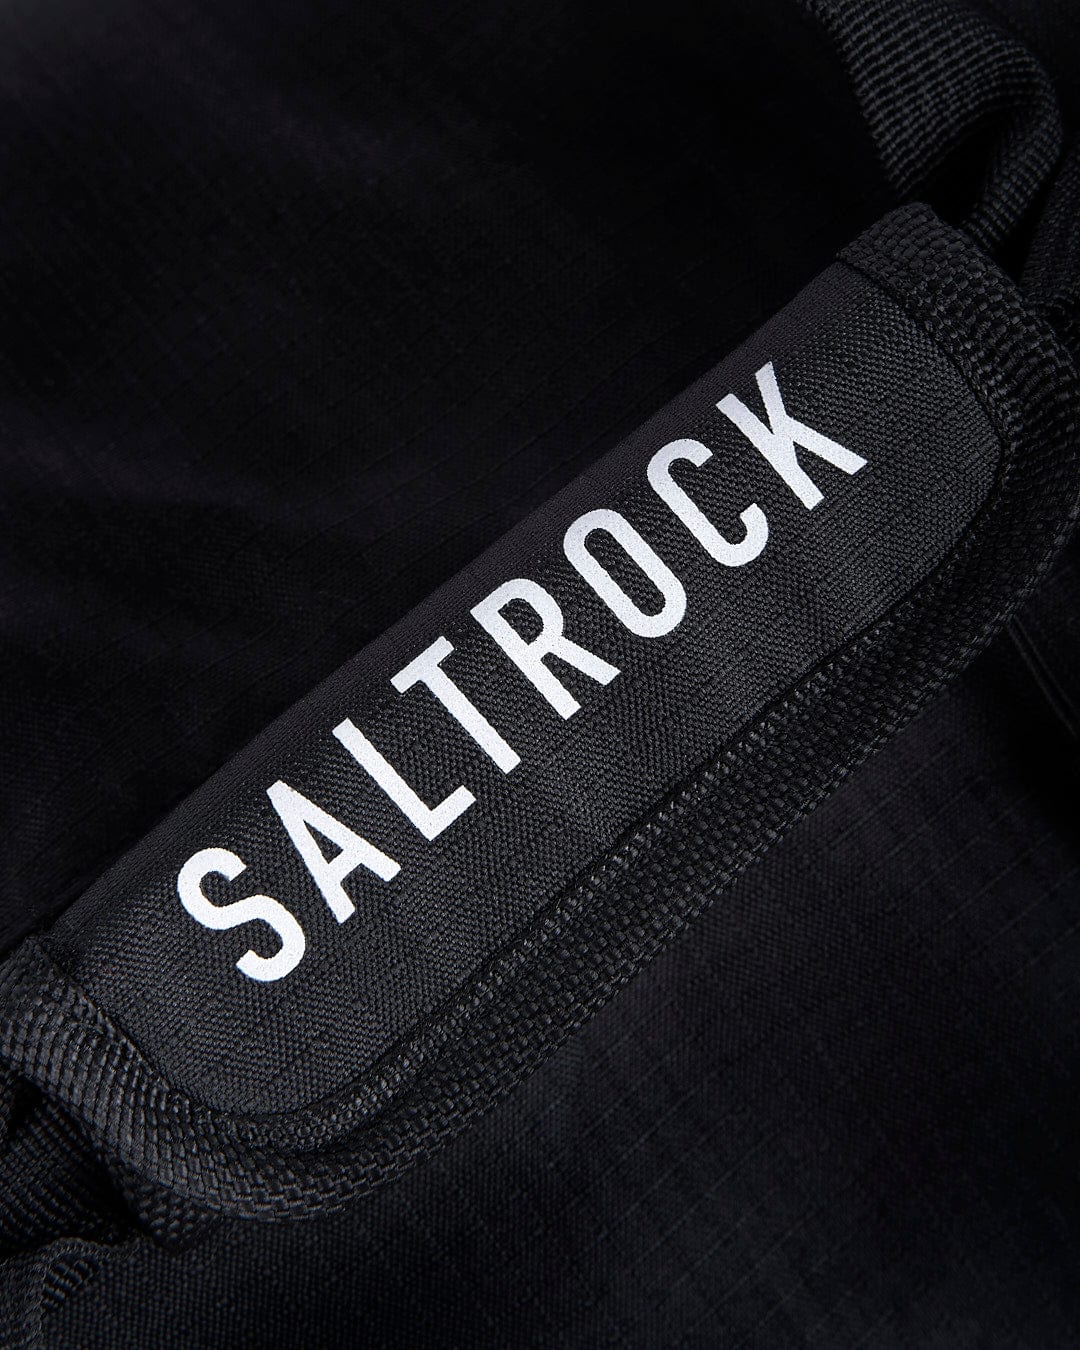 A close up of a Saltrock bag with the word Balboa - Holdall - Black on it.